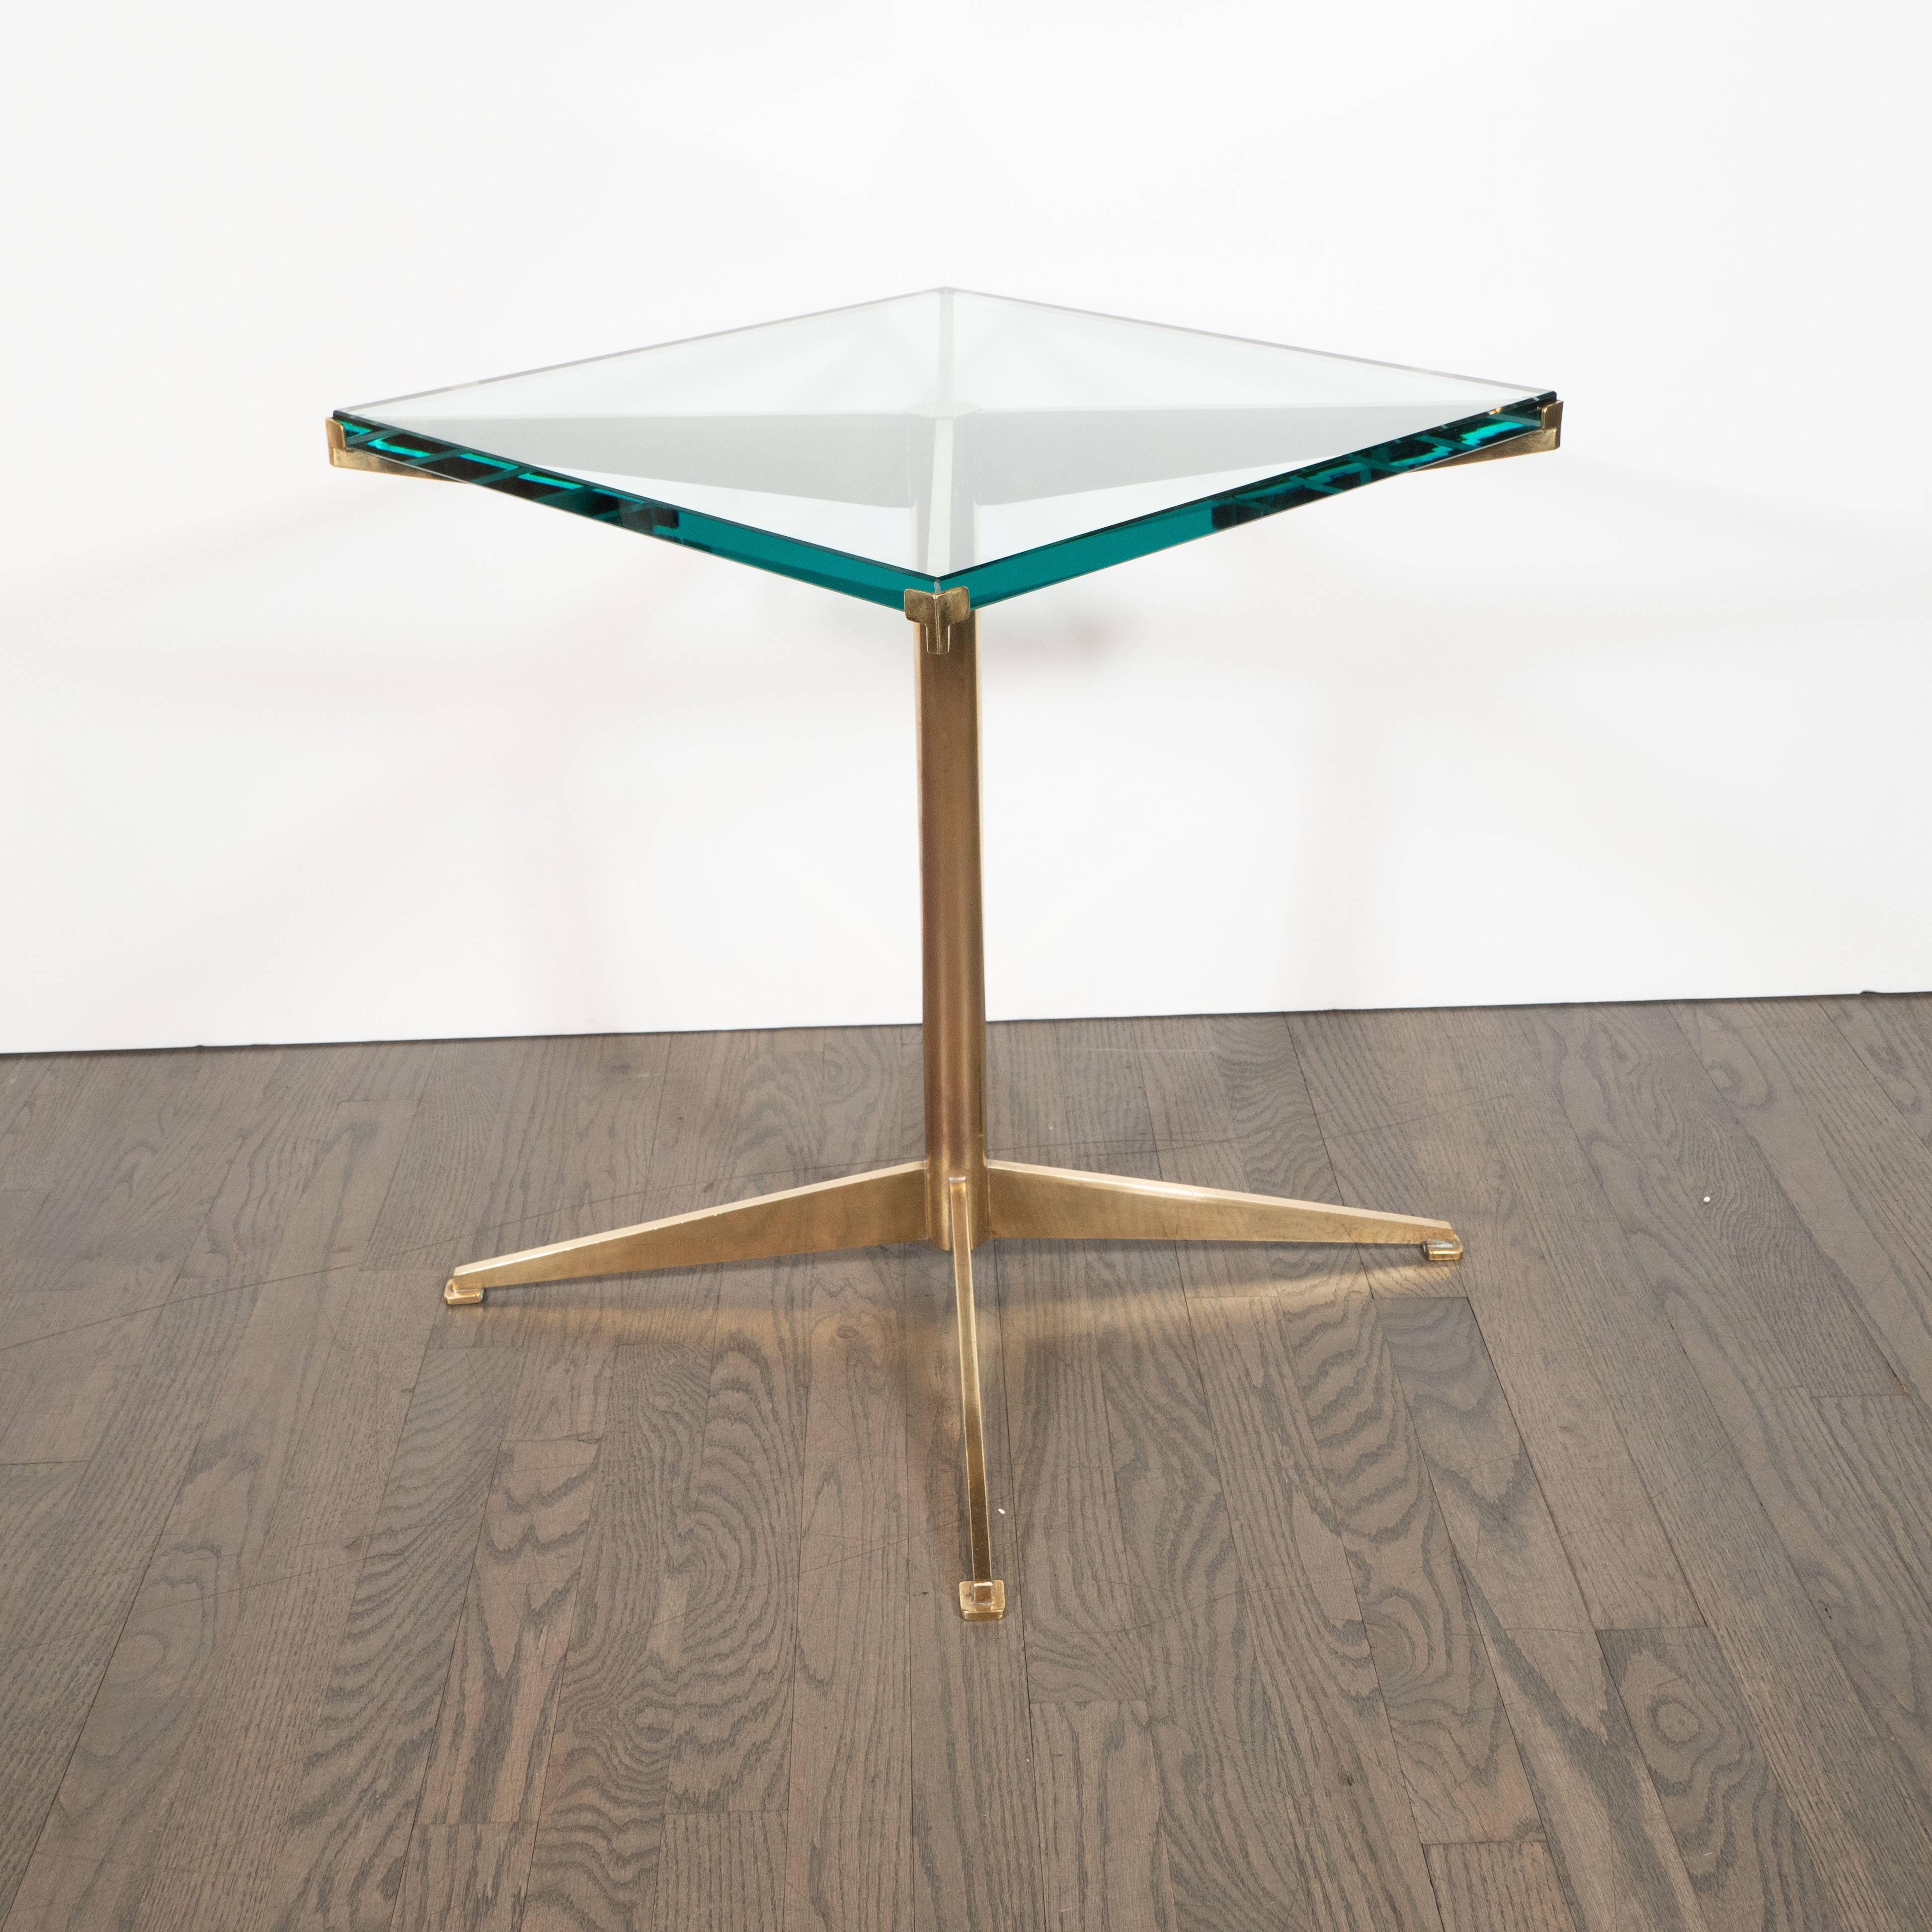 Mid-20th Century Pair of Italian Mid-Century Modern X-Form Brass and Glass End Tables